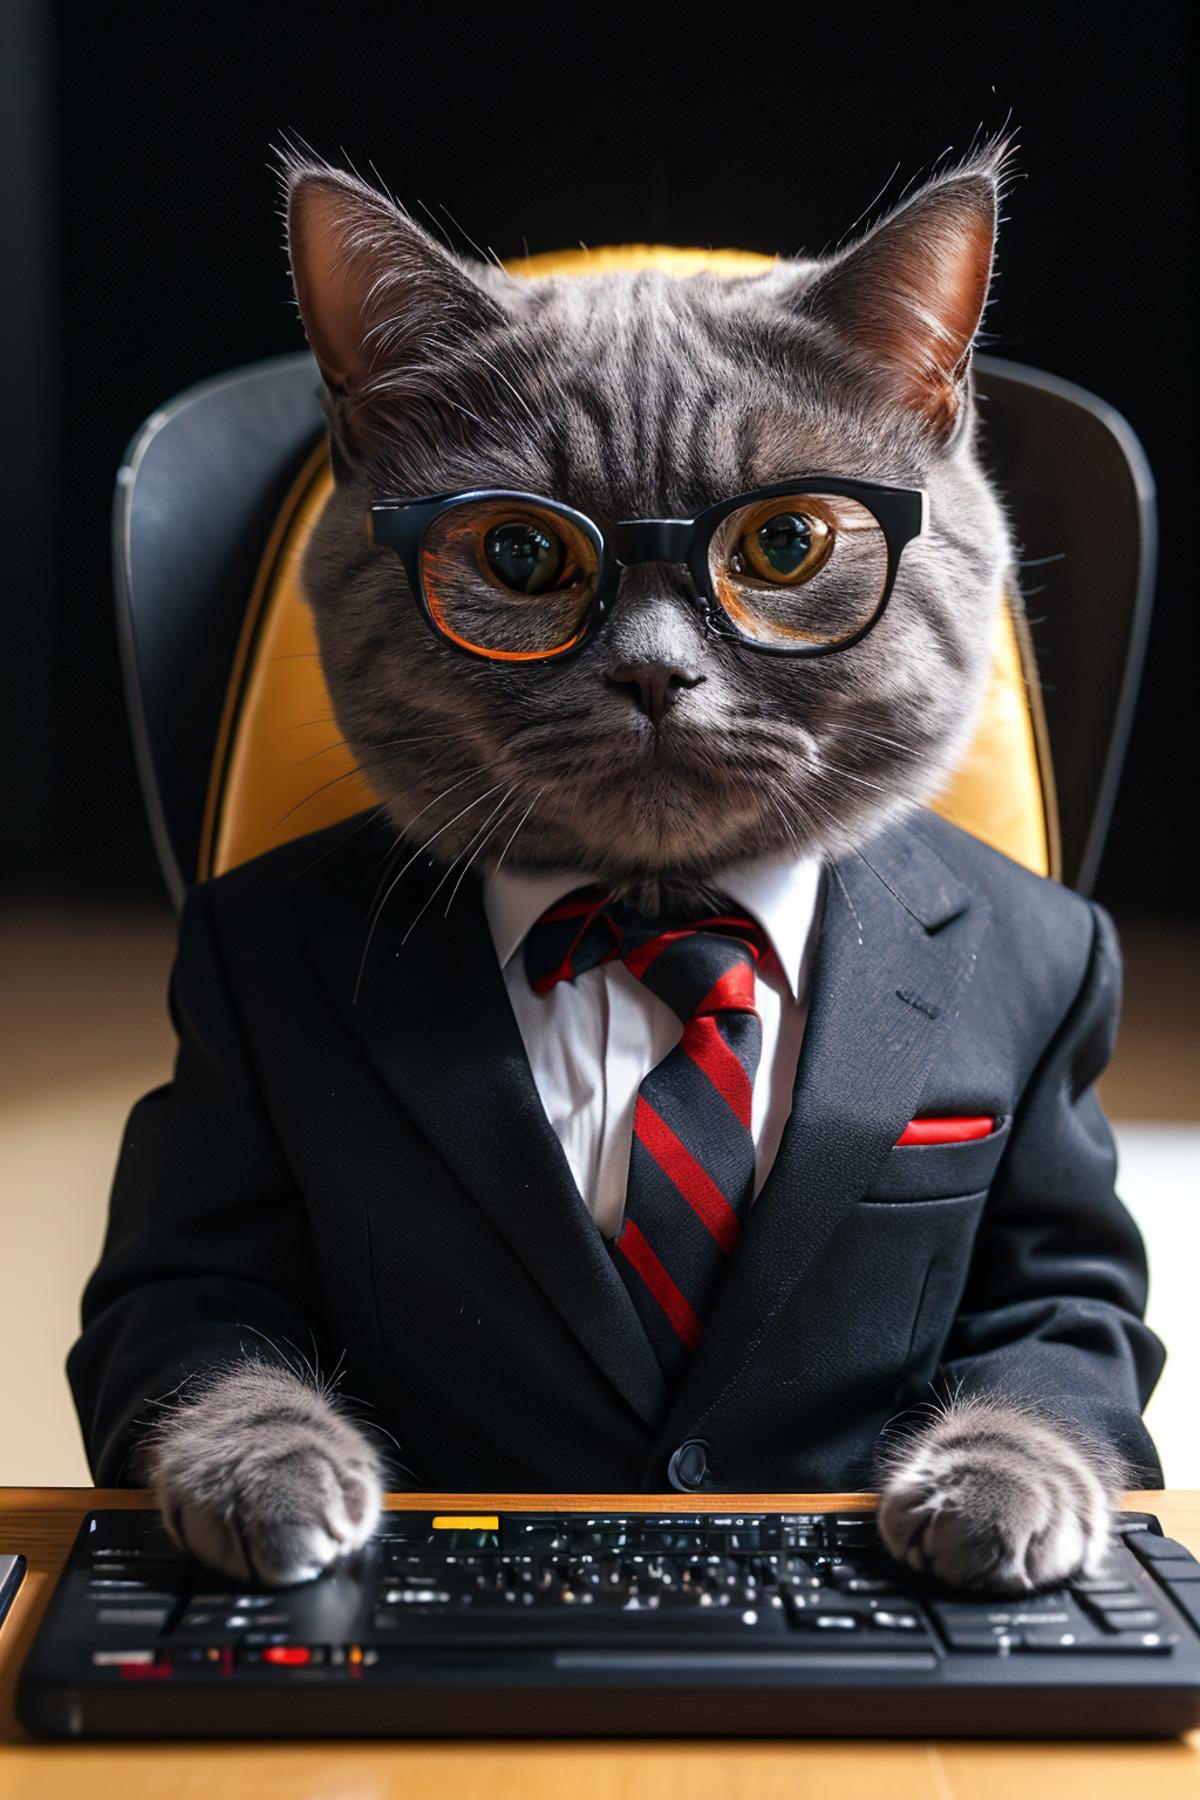 A cat dressed in a suit and glasses sitting in a chair.